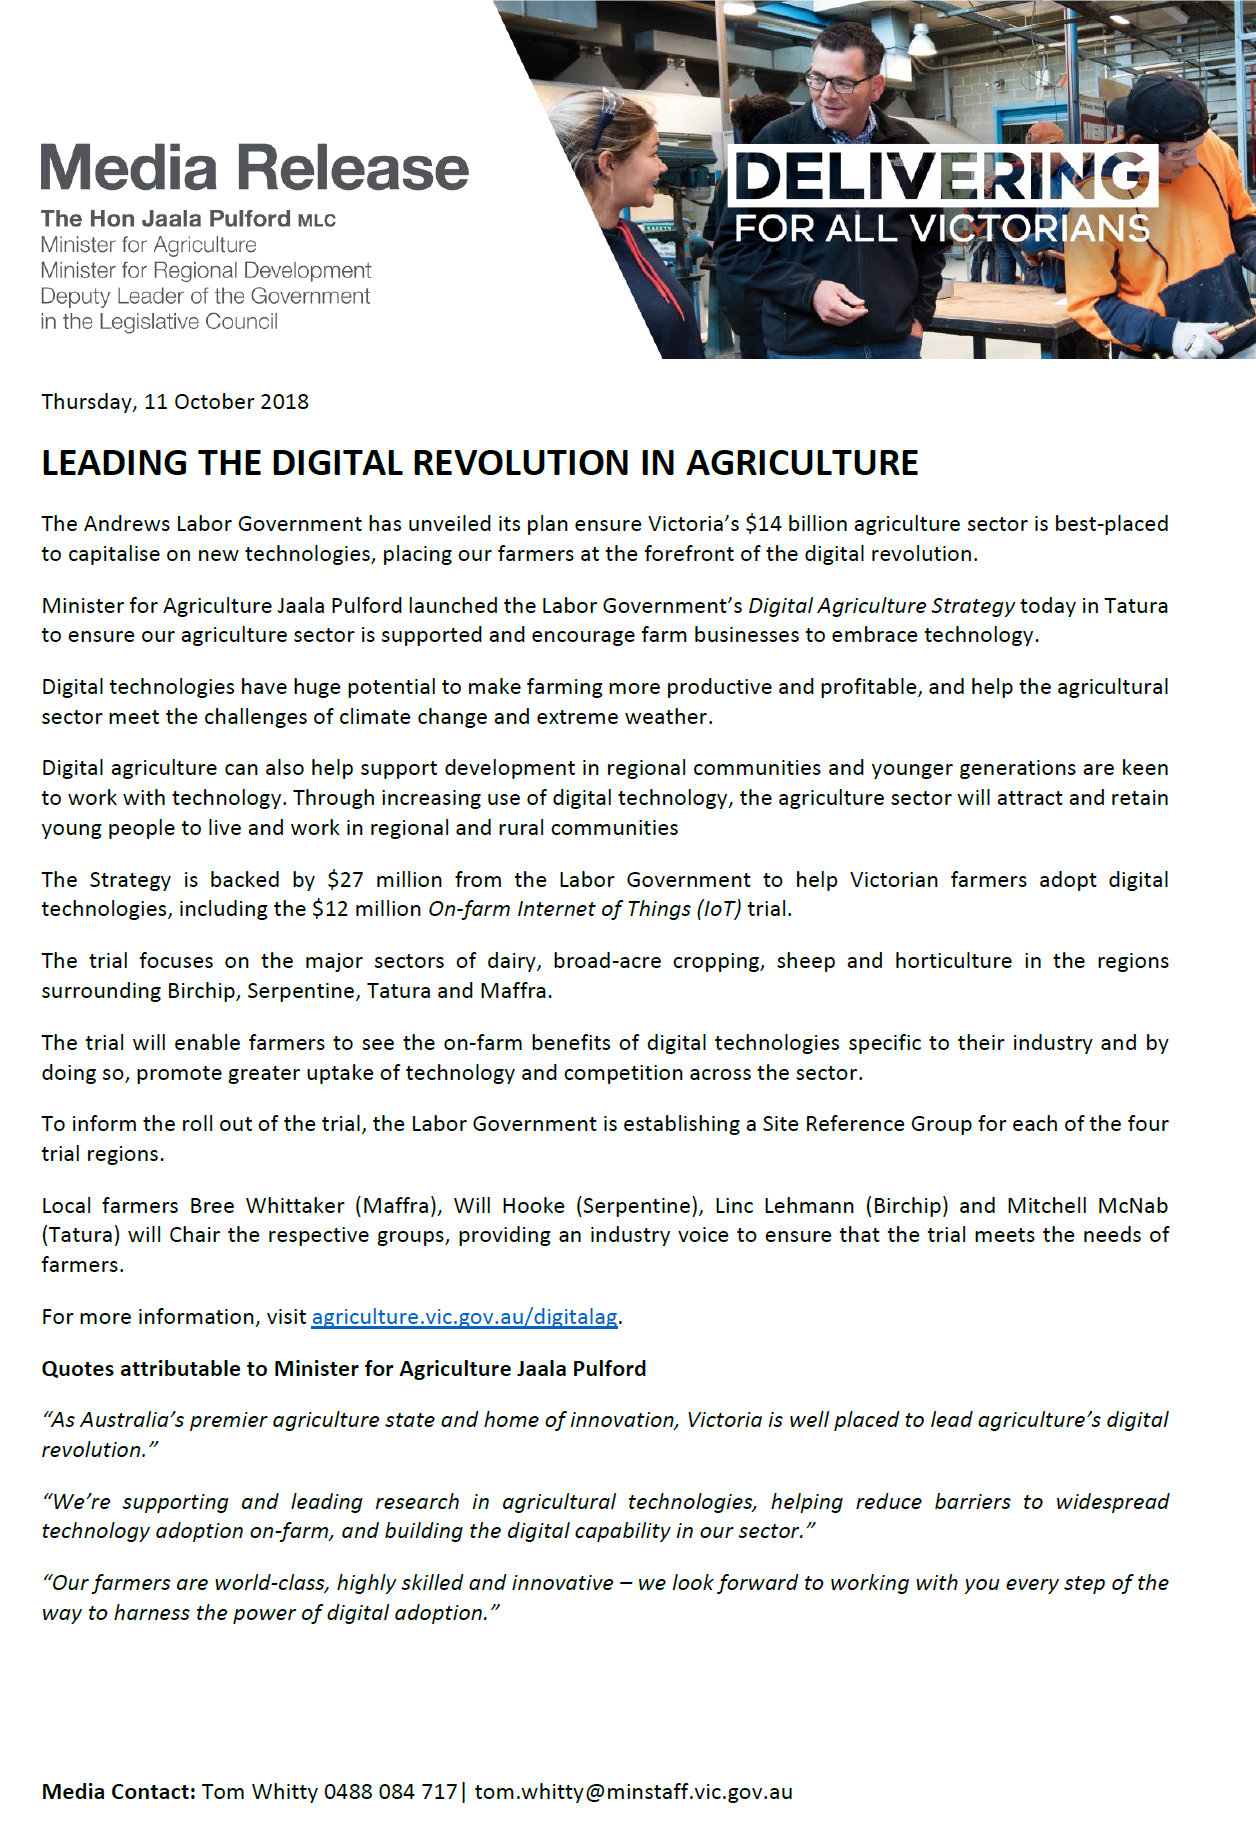 Media Release Leading the digital Revolution in Agriculture